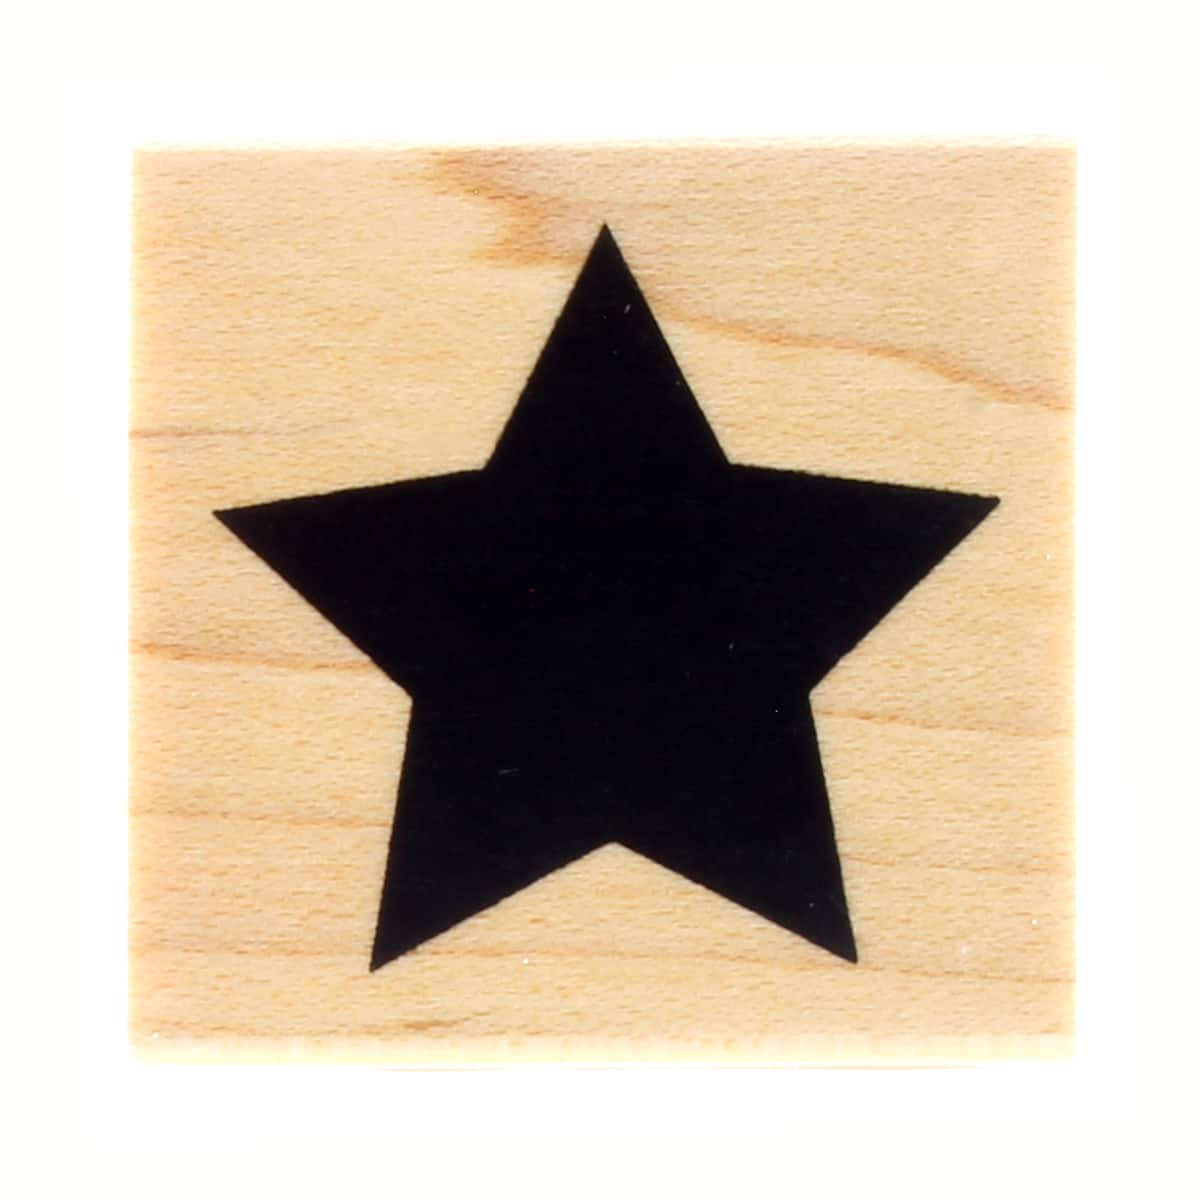  Five Stars Wooden Rubber Stamp No. 1 (2.5 x 2.5) : Arts,  Crafts & Sewing